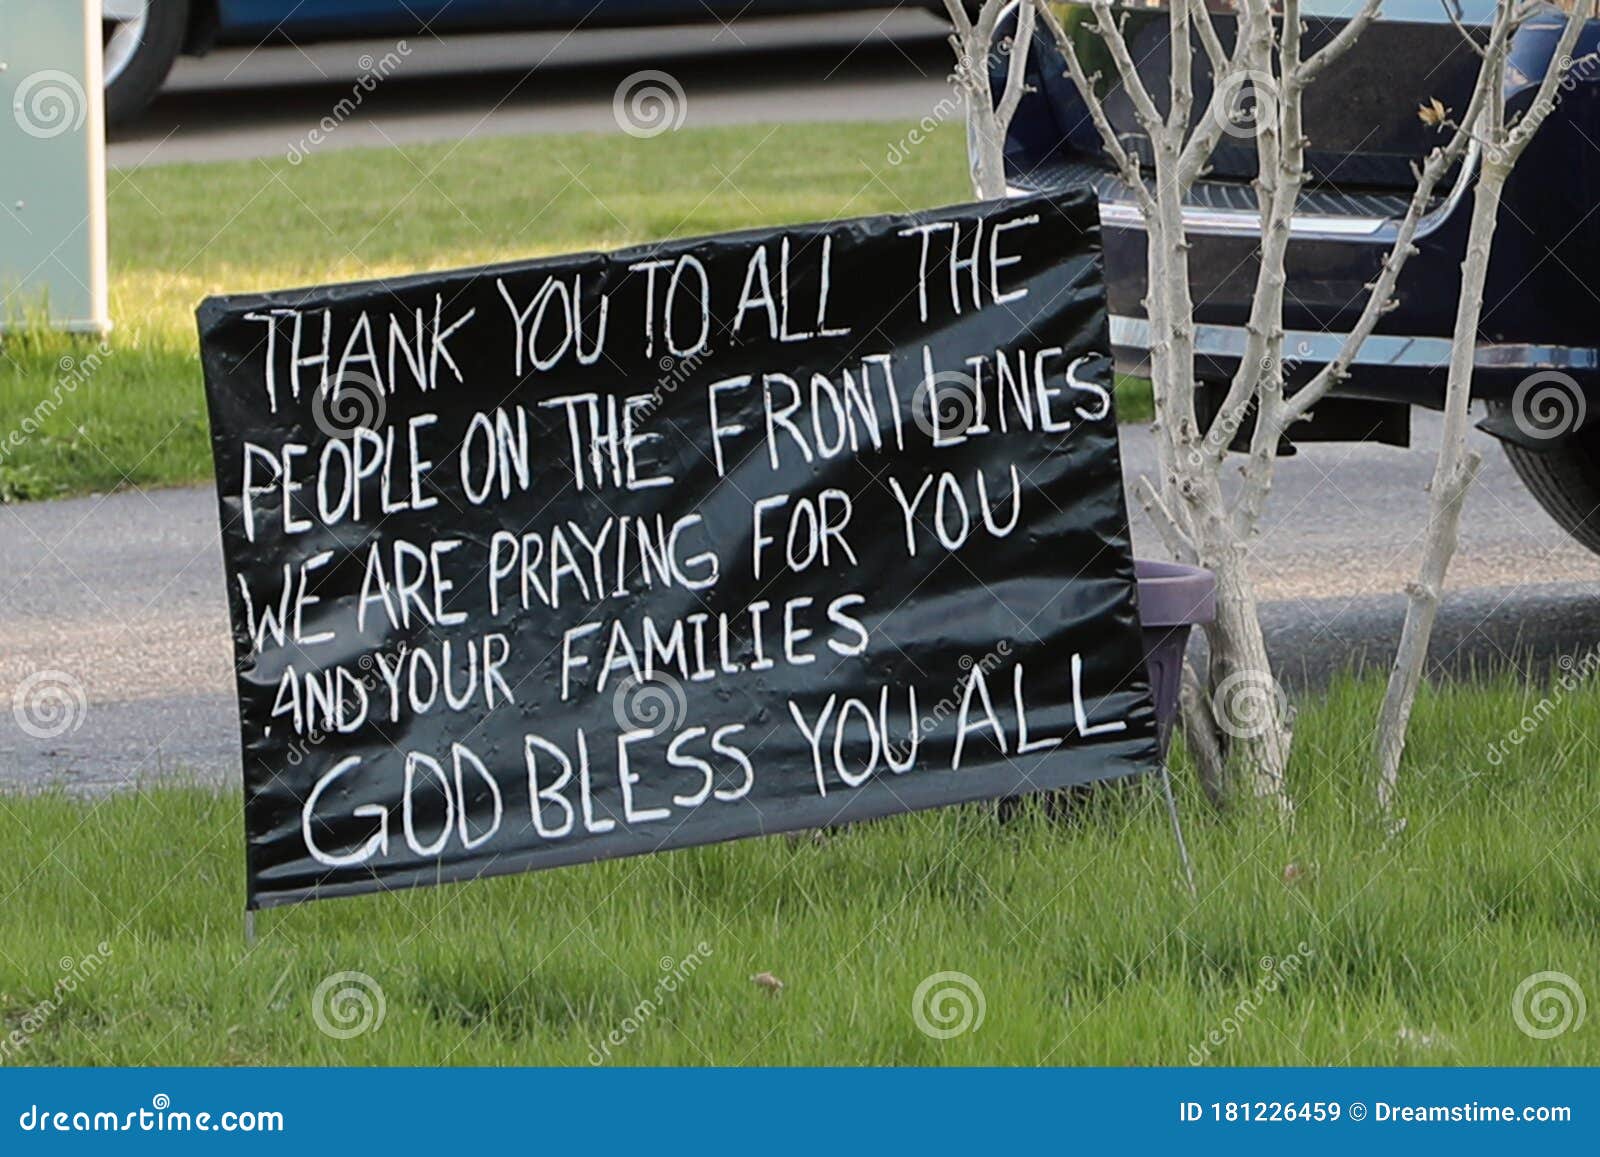 Covid 19 Thank You To All People On The Front Lines Praying For You Editorial Stock Image Image Of Pandemic People